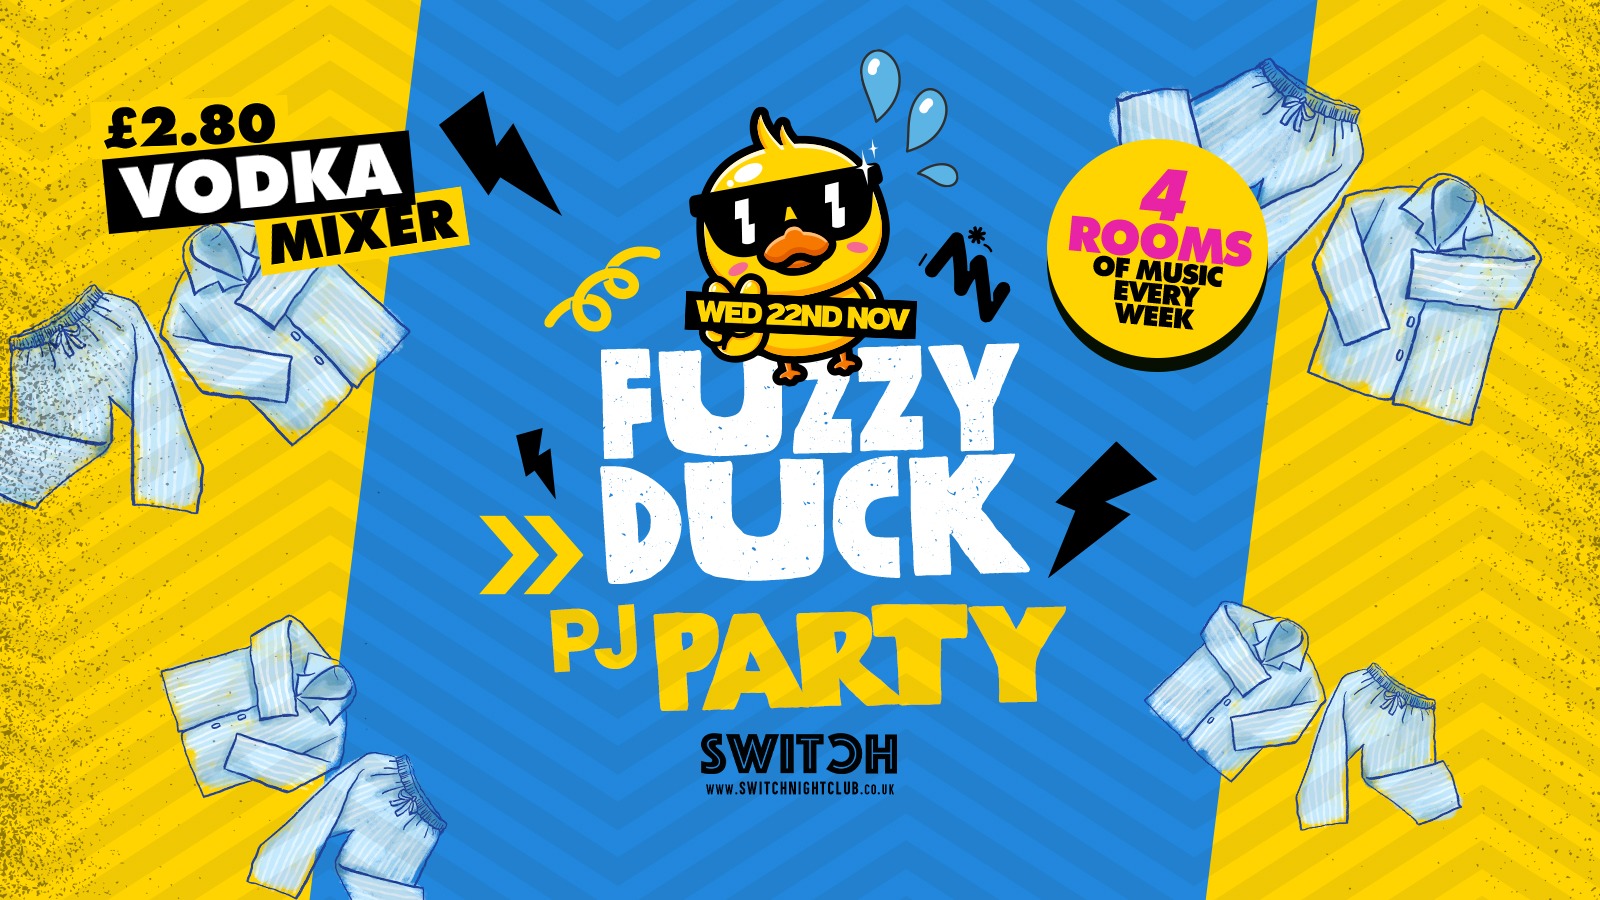 Fuzzy Duck | PJ PARTY | Official Student Social Wednesday